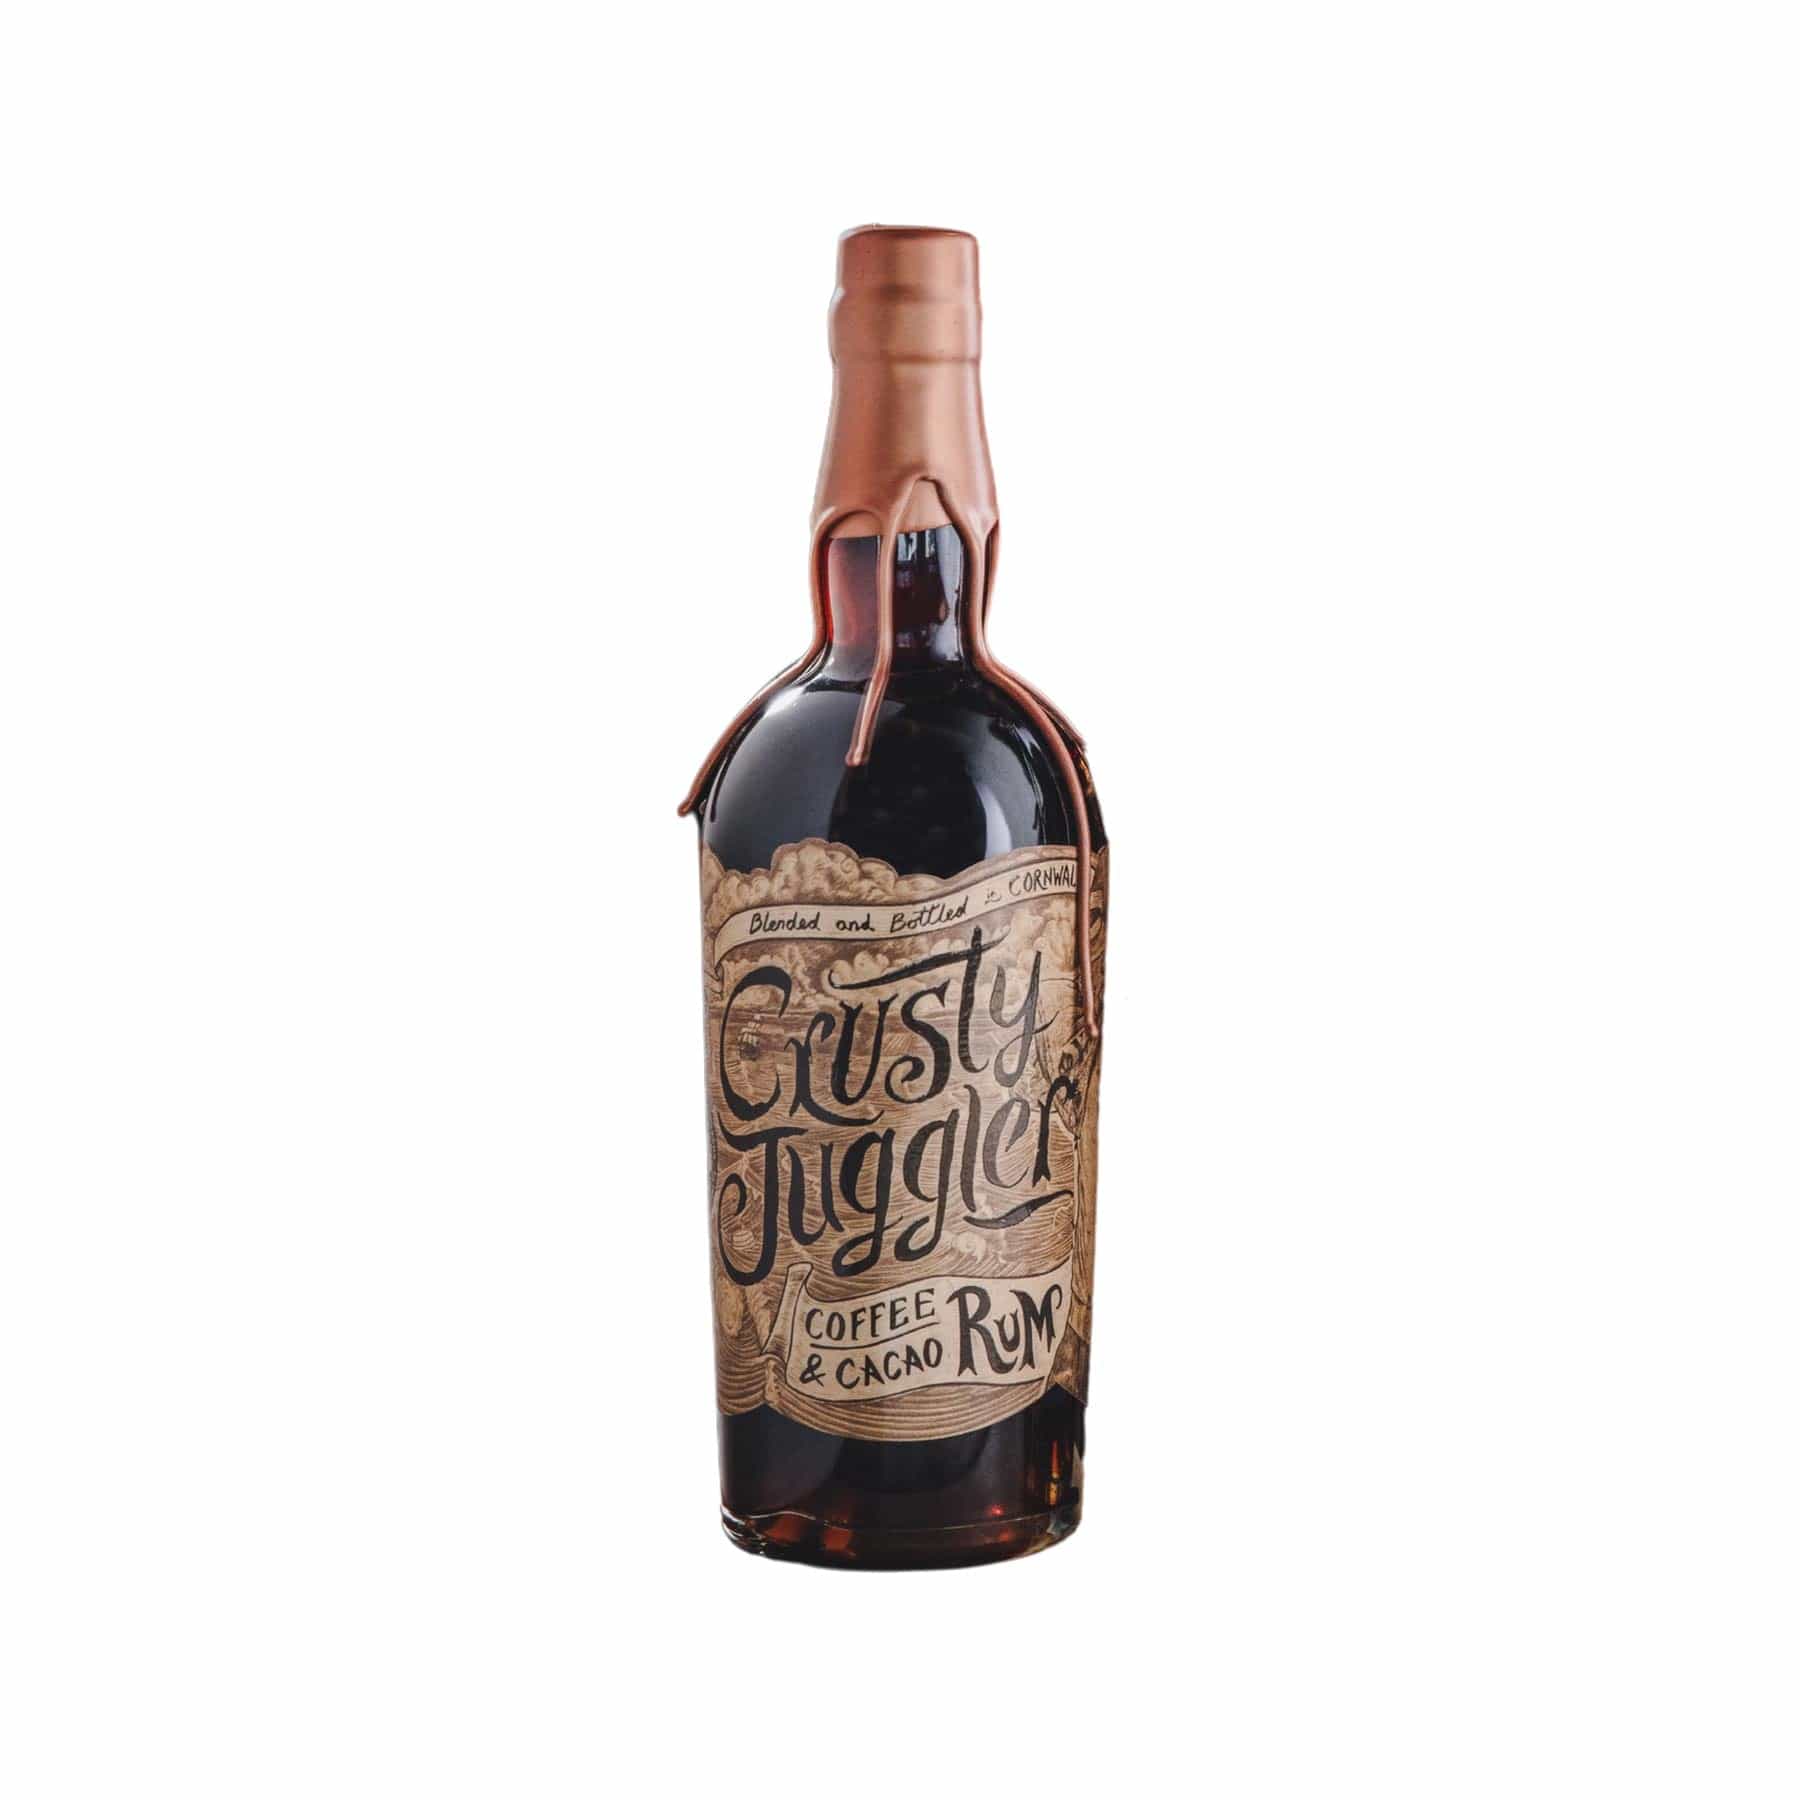 Coffee & cacao rum 70cl